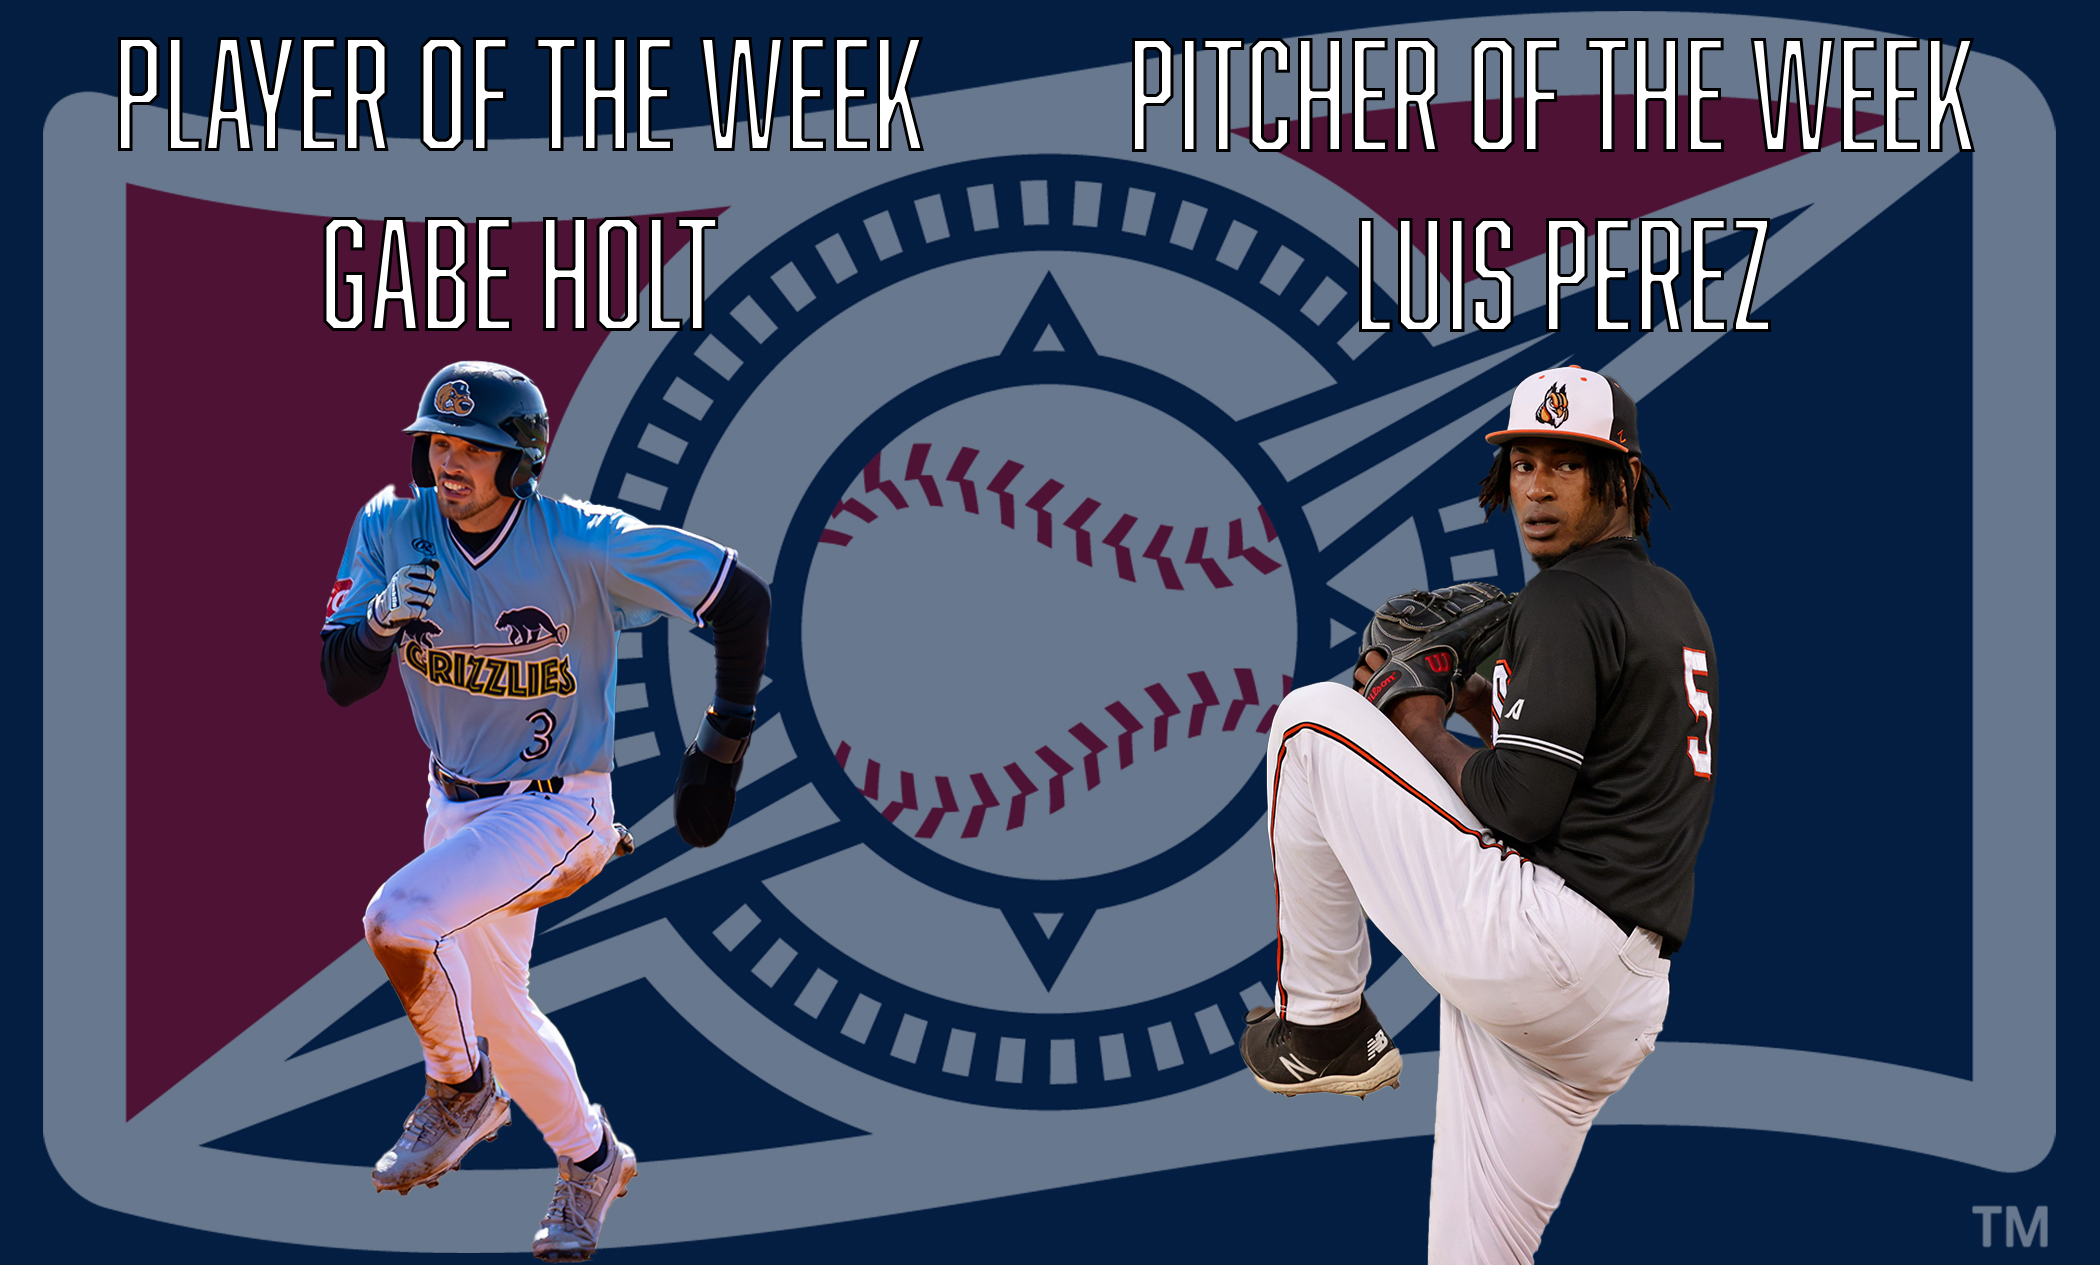 GATEWAY’S GABE HOLT WINS THE SEASONS INAUGURAL PLAYER OF THE WEEK, SCHAMBURG’S LUIS PEREZ TAKES PITCHER OF THE WEEK